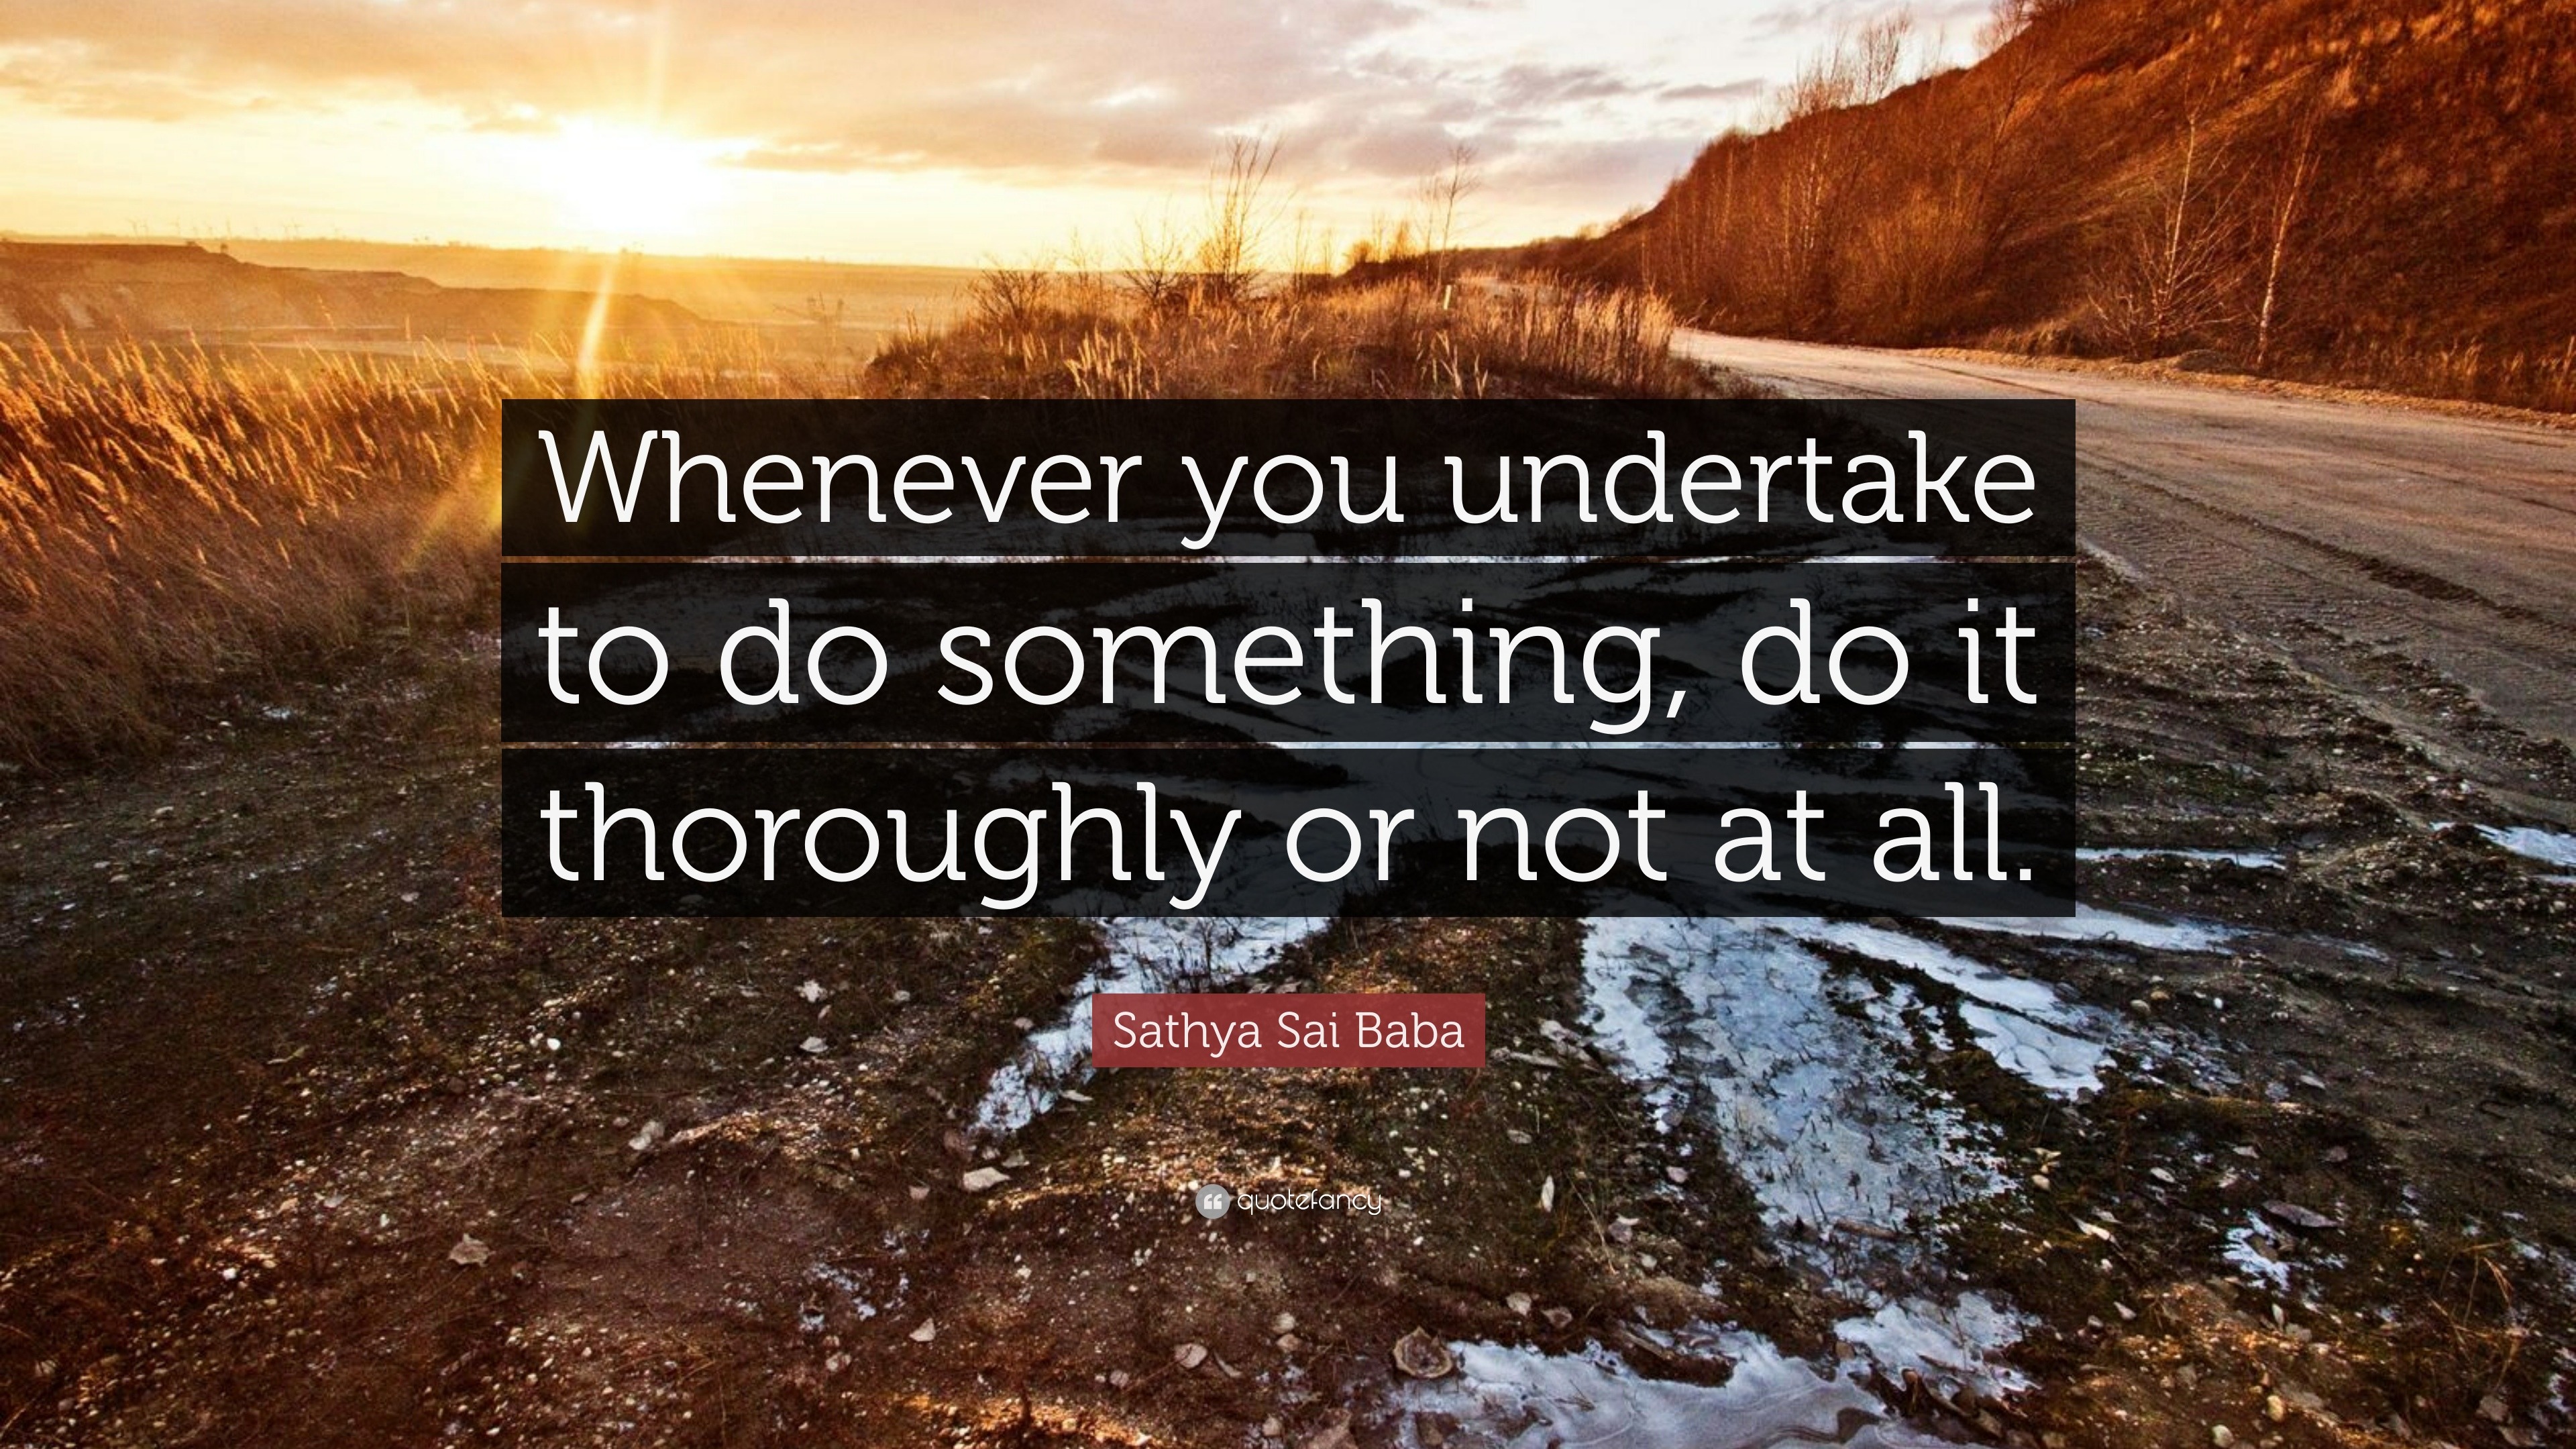 Sathya Sai Baba Quote: “Whenever you undertake to do something, do it ...